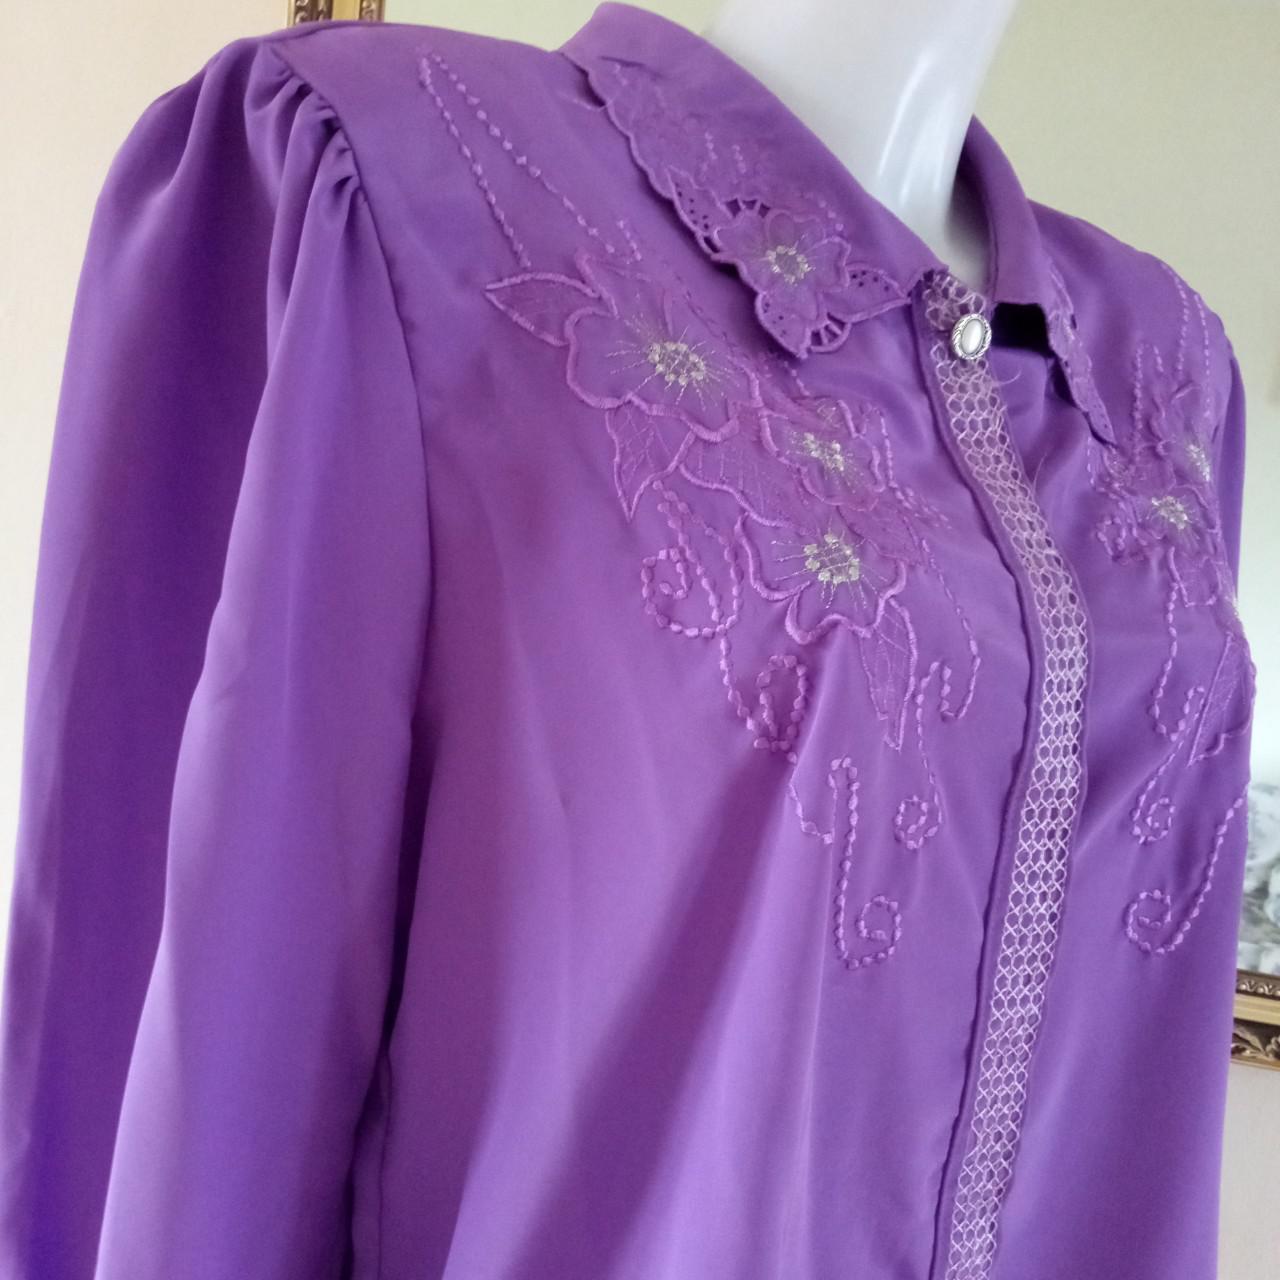 American Vintage Women's Purple and Silver Blouse